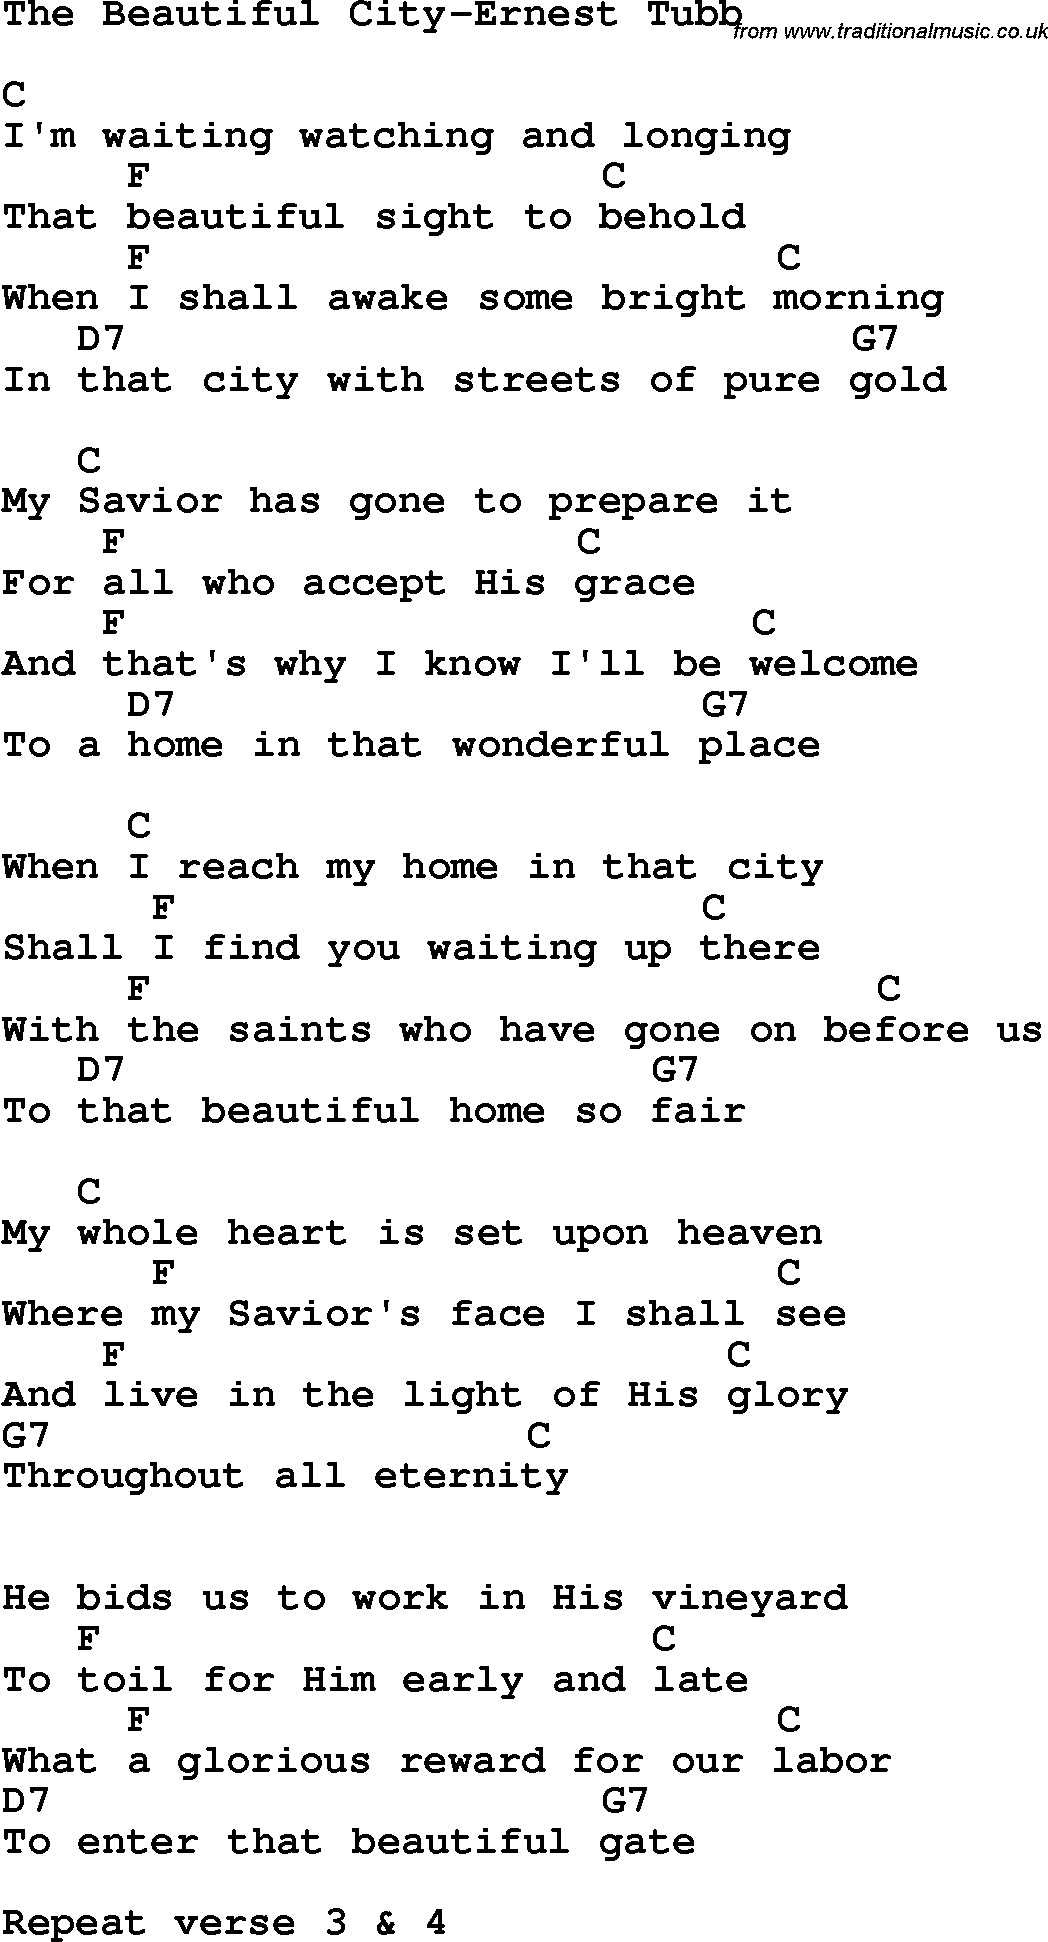 Country, Southern and Bluegrass Gospel Song The Beautiful City-Ernest Tubb lyrics and chords